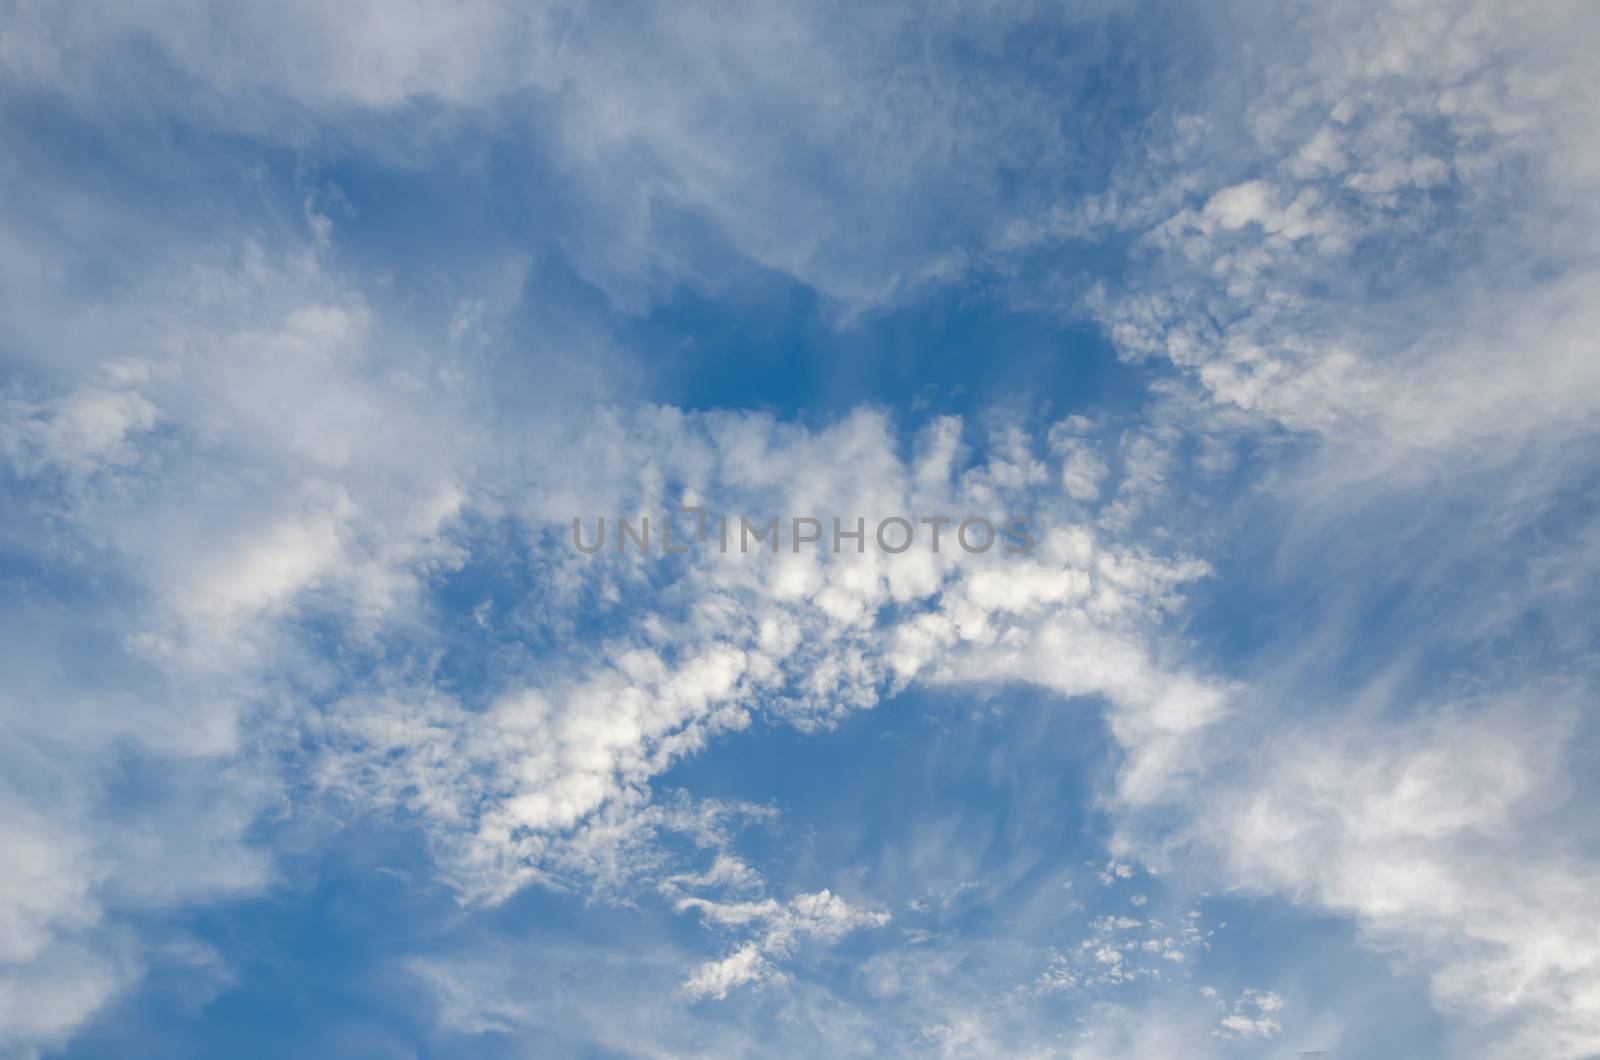 blue sky with clouds by photobyphotoboy